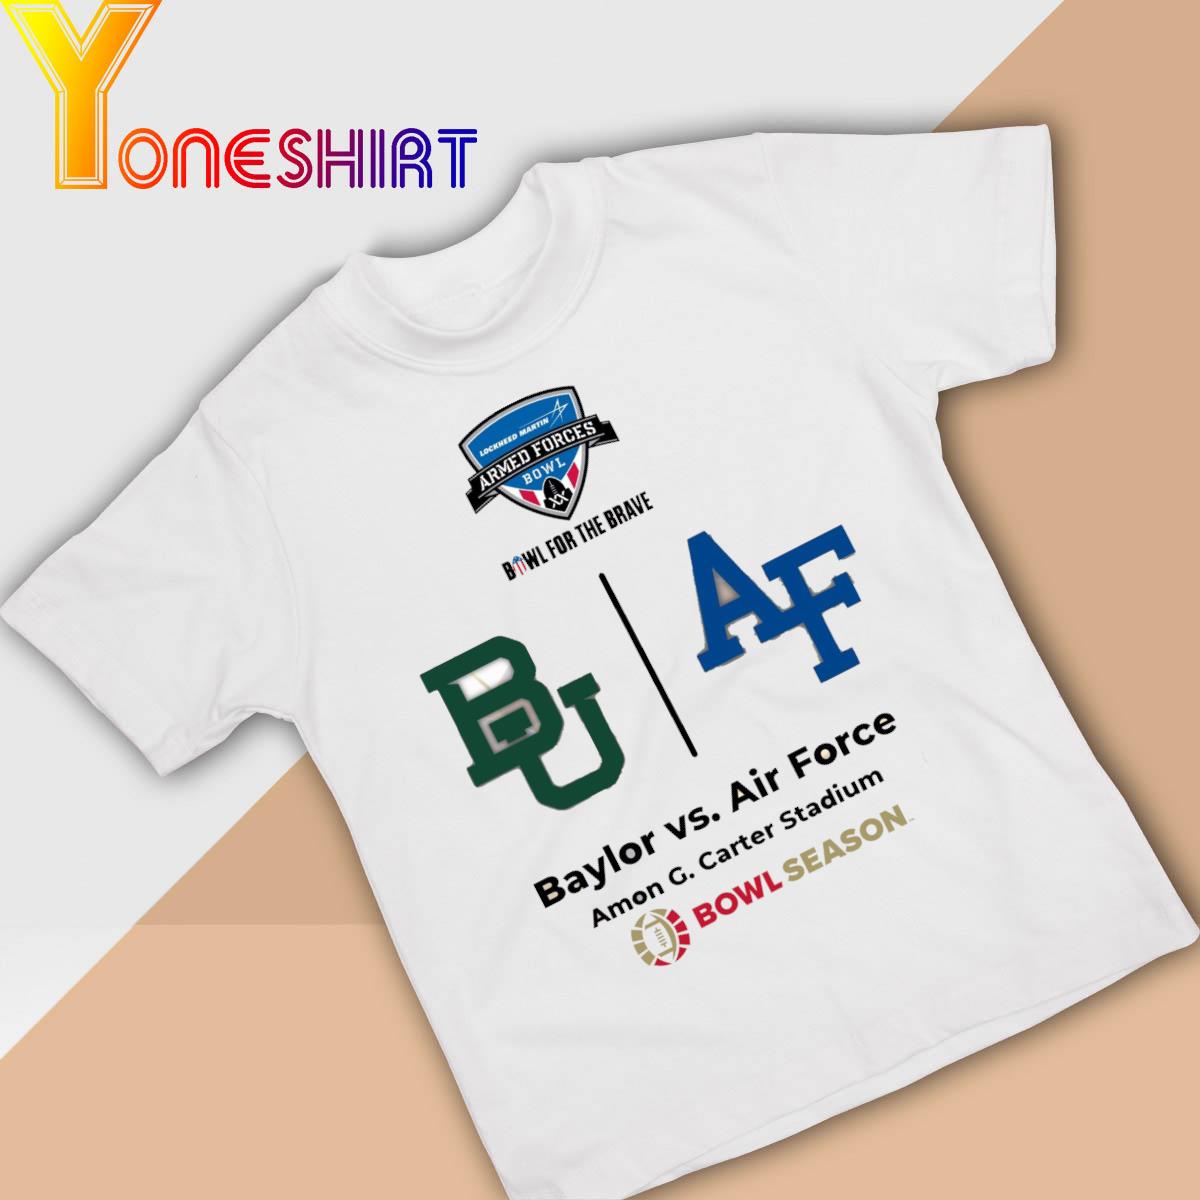 Armed Forces Bowl for the Brave Baylor vs Air Force Bowl season shirt